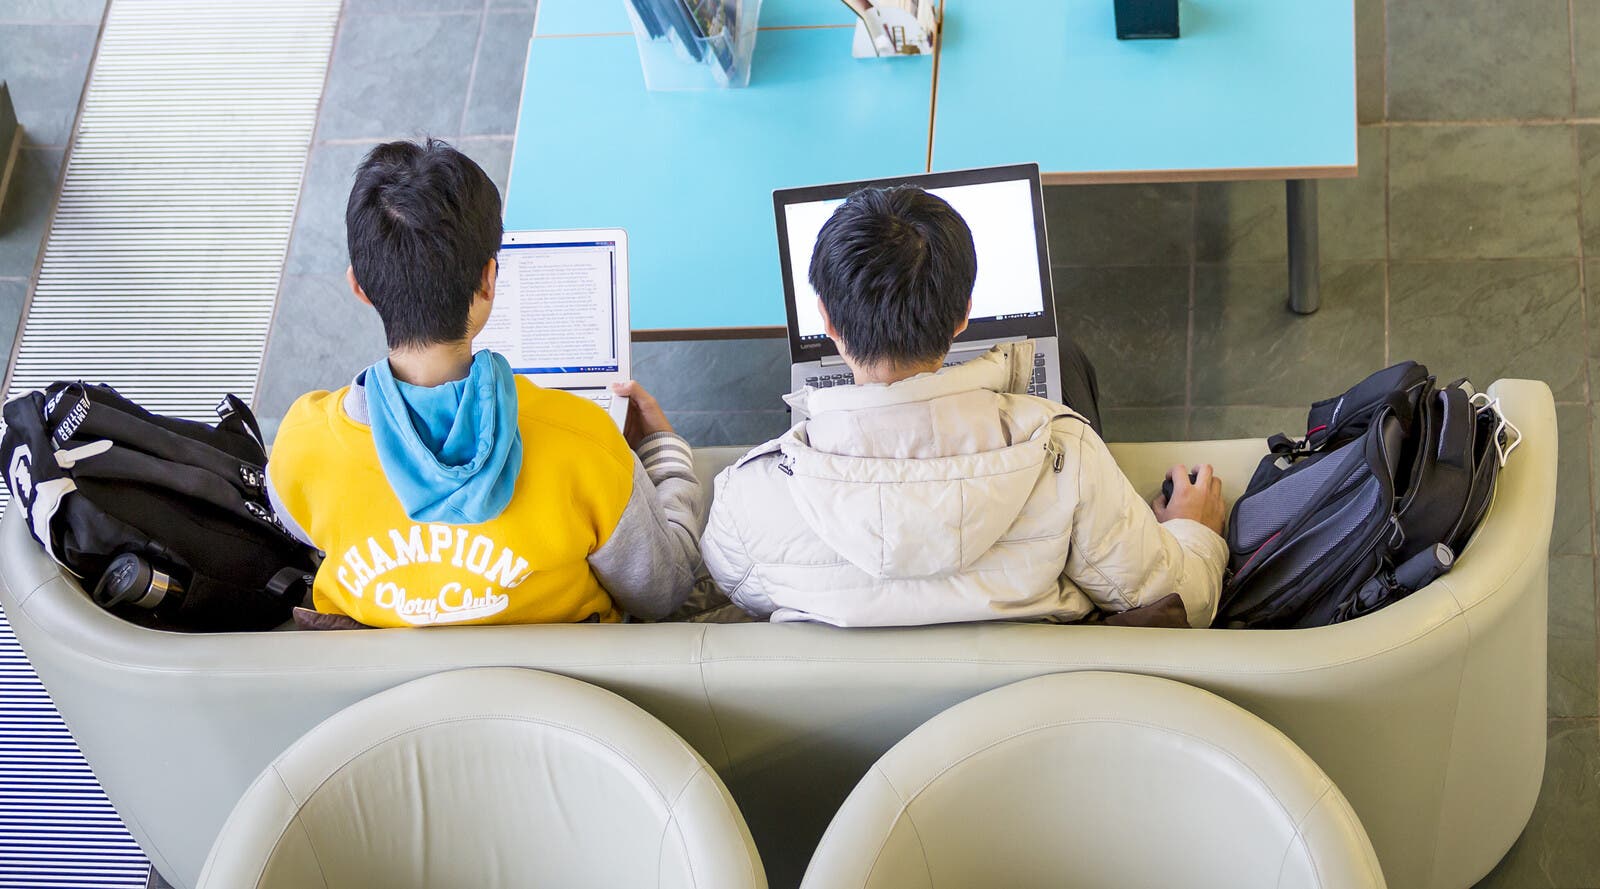 Students on laptops and sitting on a sofa